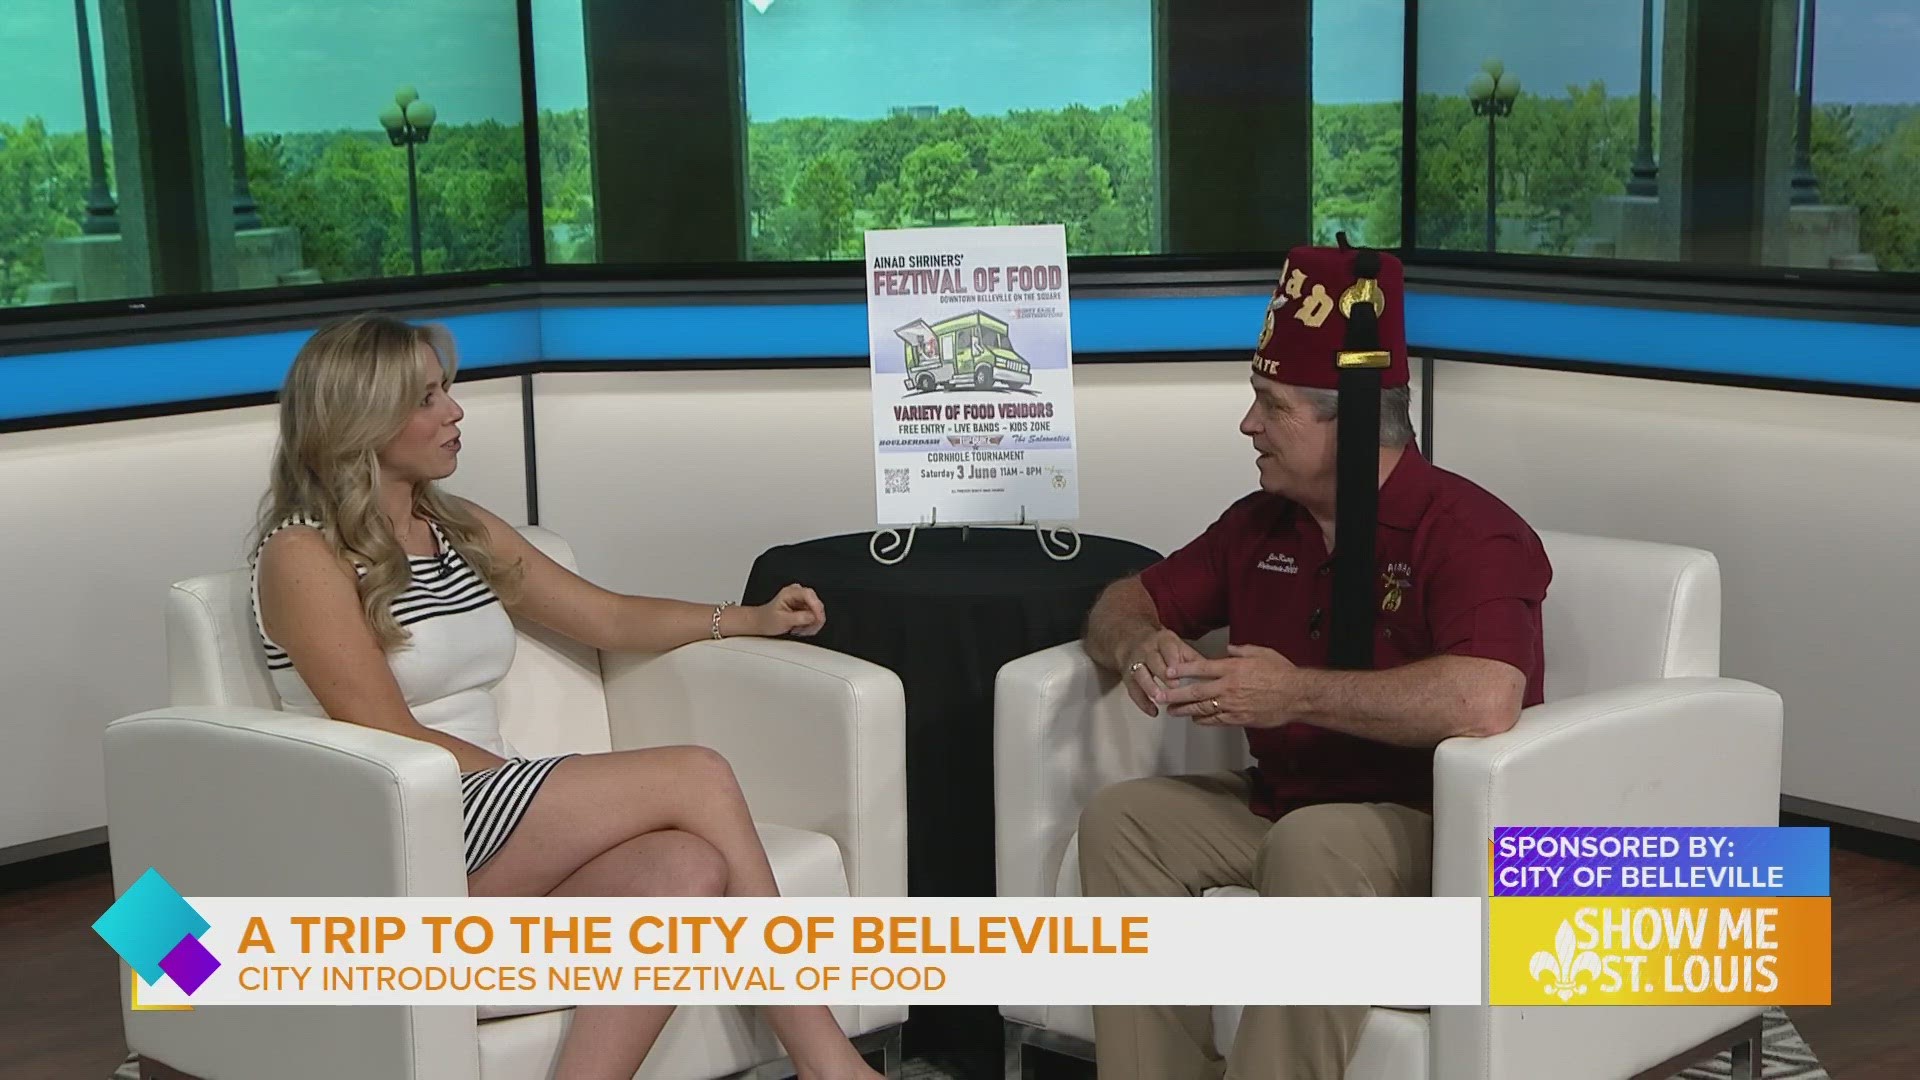 Weekend events take over downtown Belleville on June 2nd and 3rd.